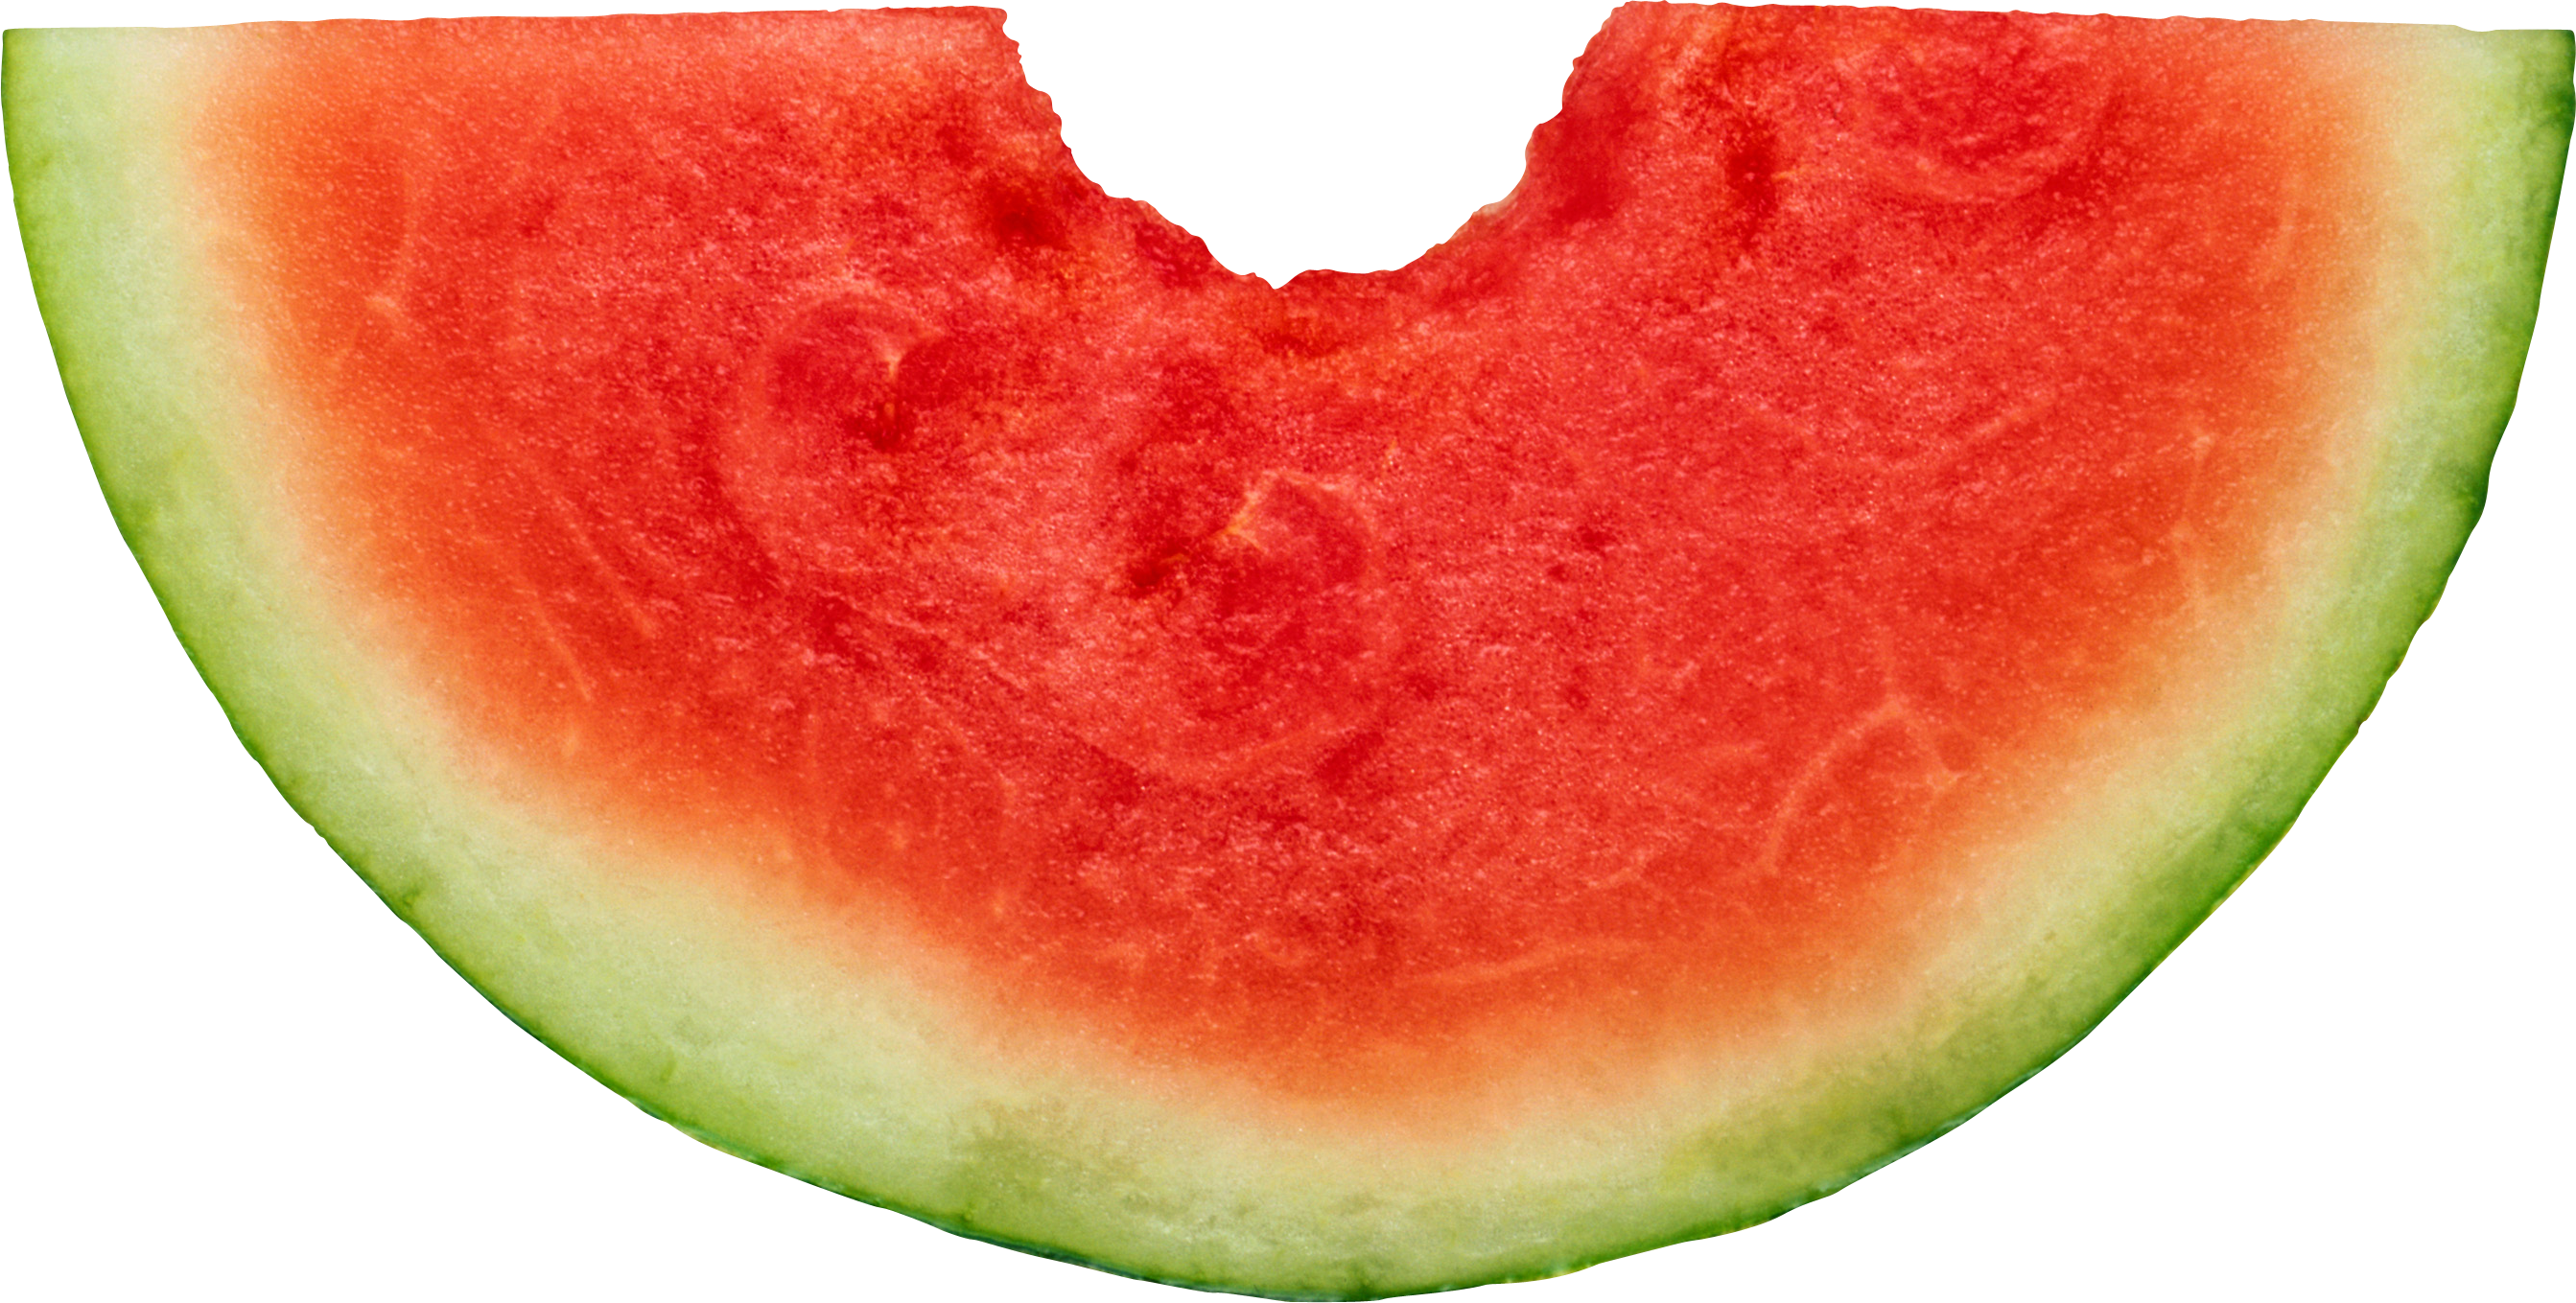 Watermelon no seeds clipart 